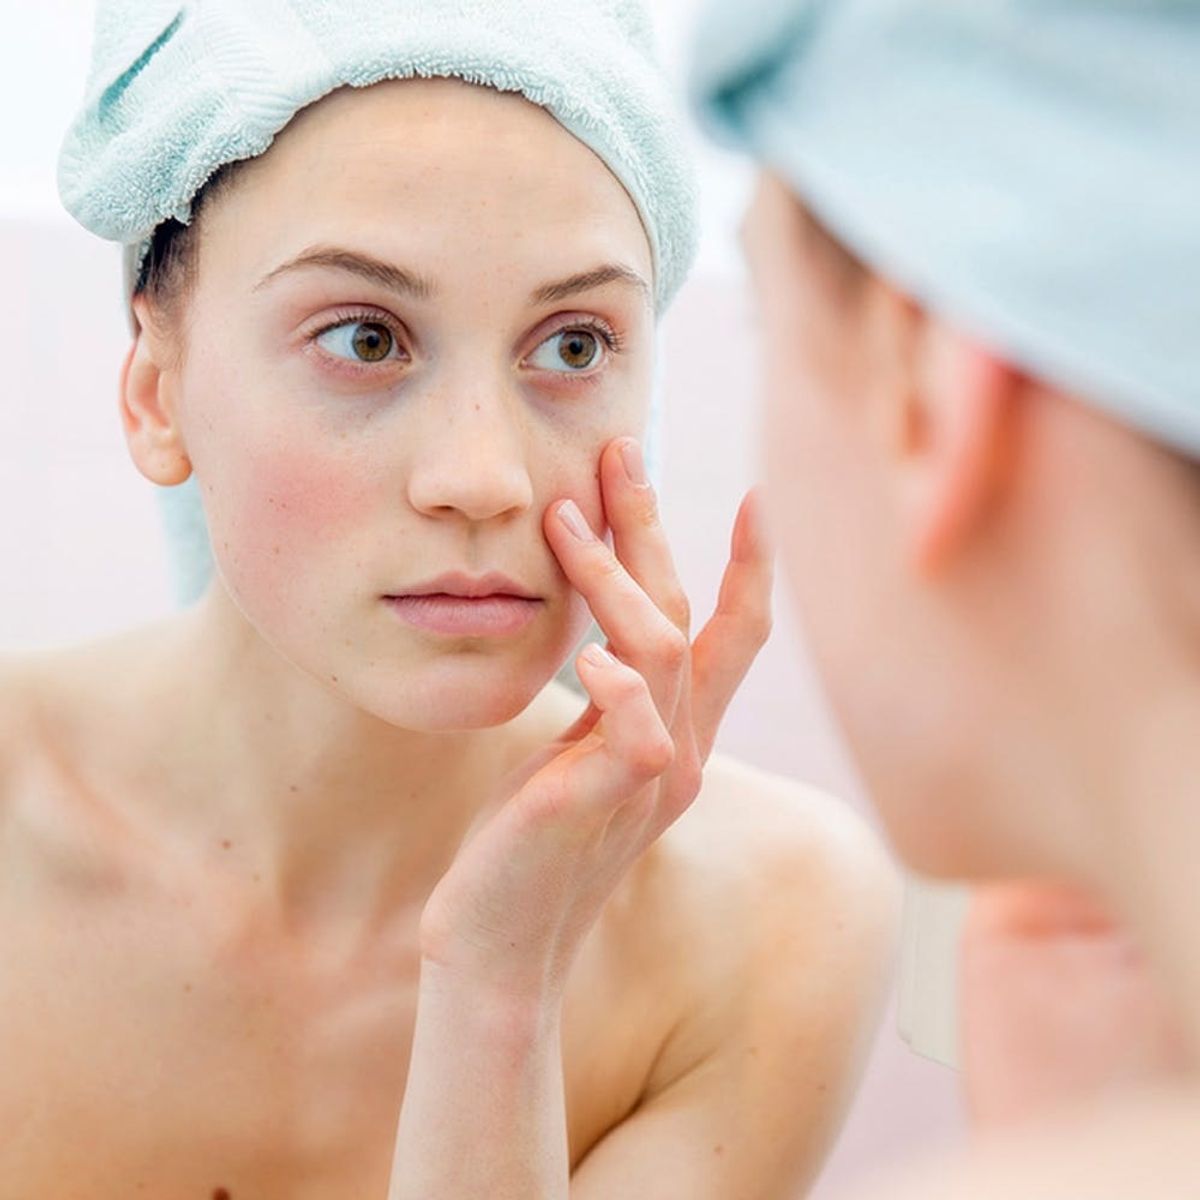 This Everyday Habit Could Be Doing Terrible Things to Your Skin